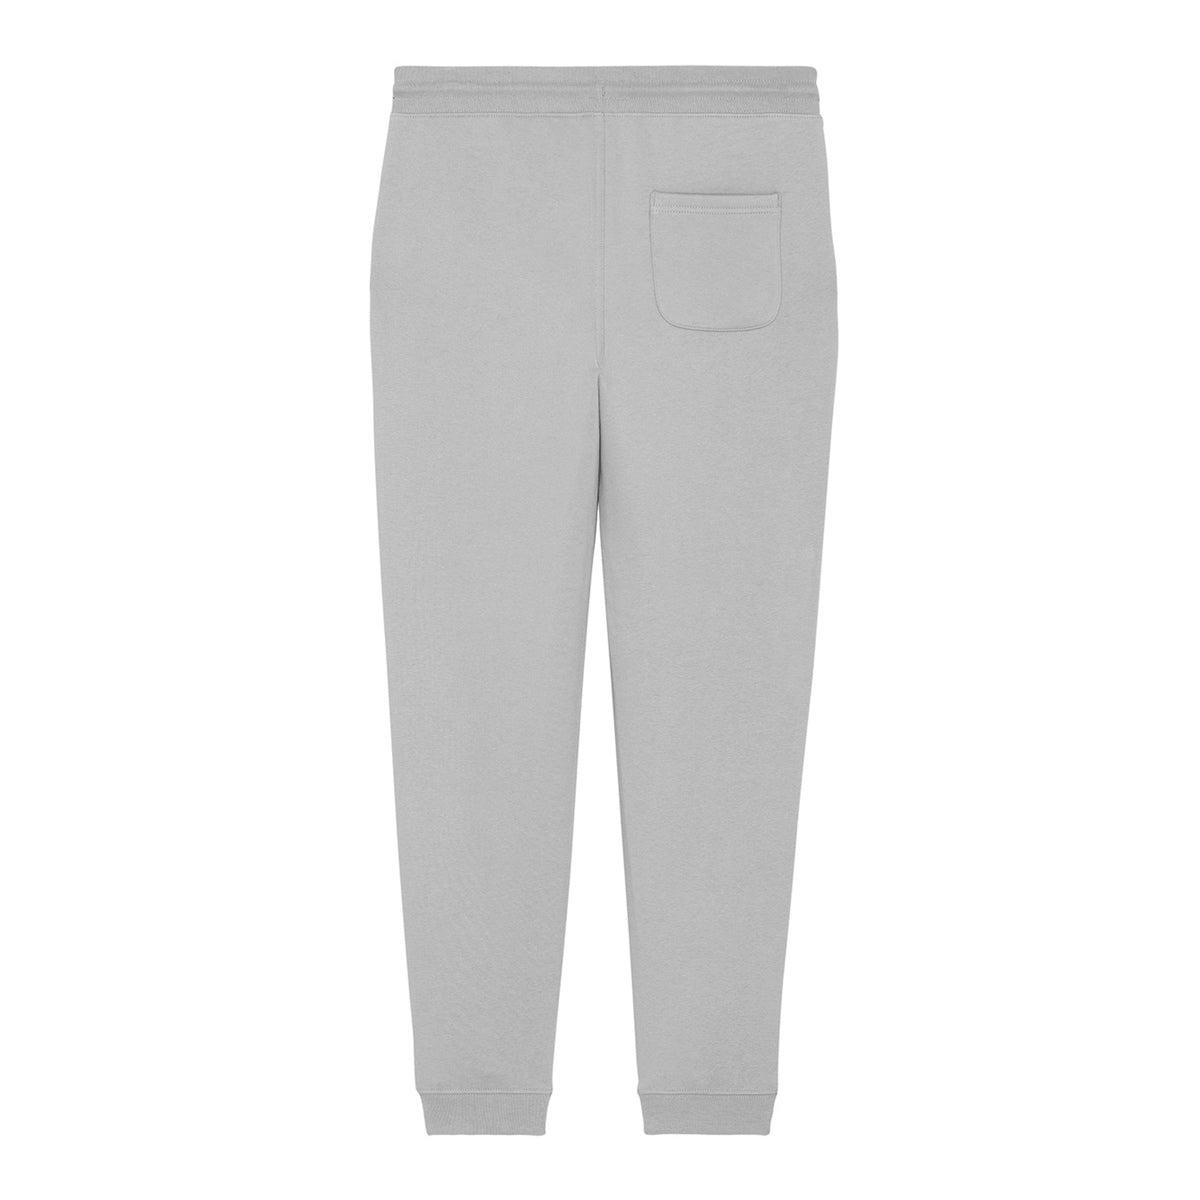 Mover Joggers UK